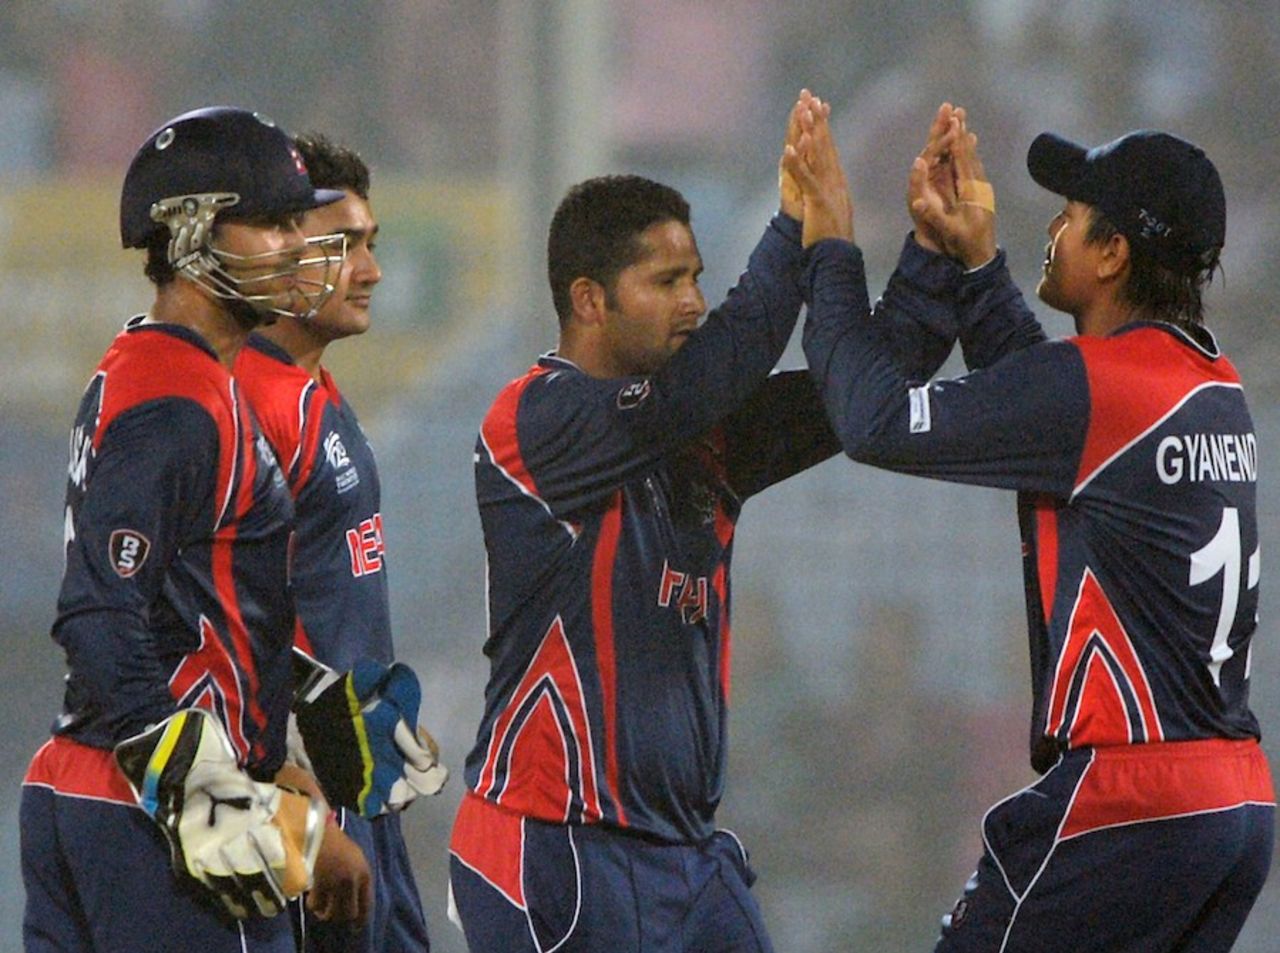 Basant Regmi is congratulated after dismissing Tamim Iqbal, Bangladesh v Nepal, World T20, Group A, Chittagong, March 18, 2014